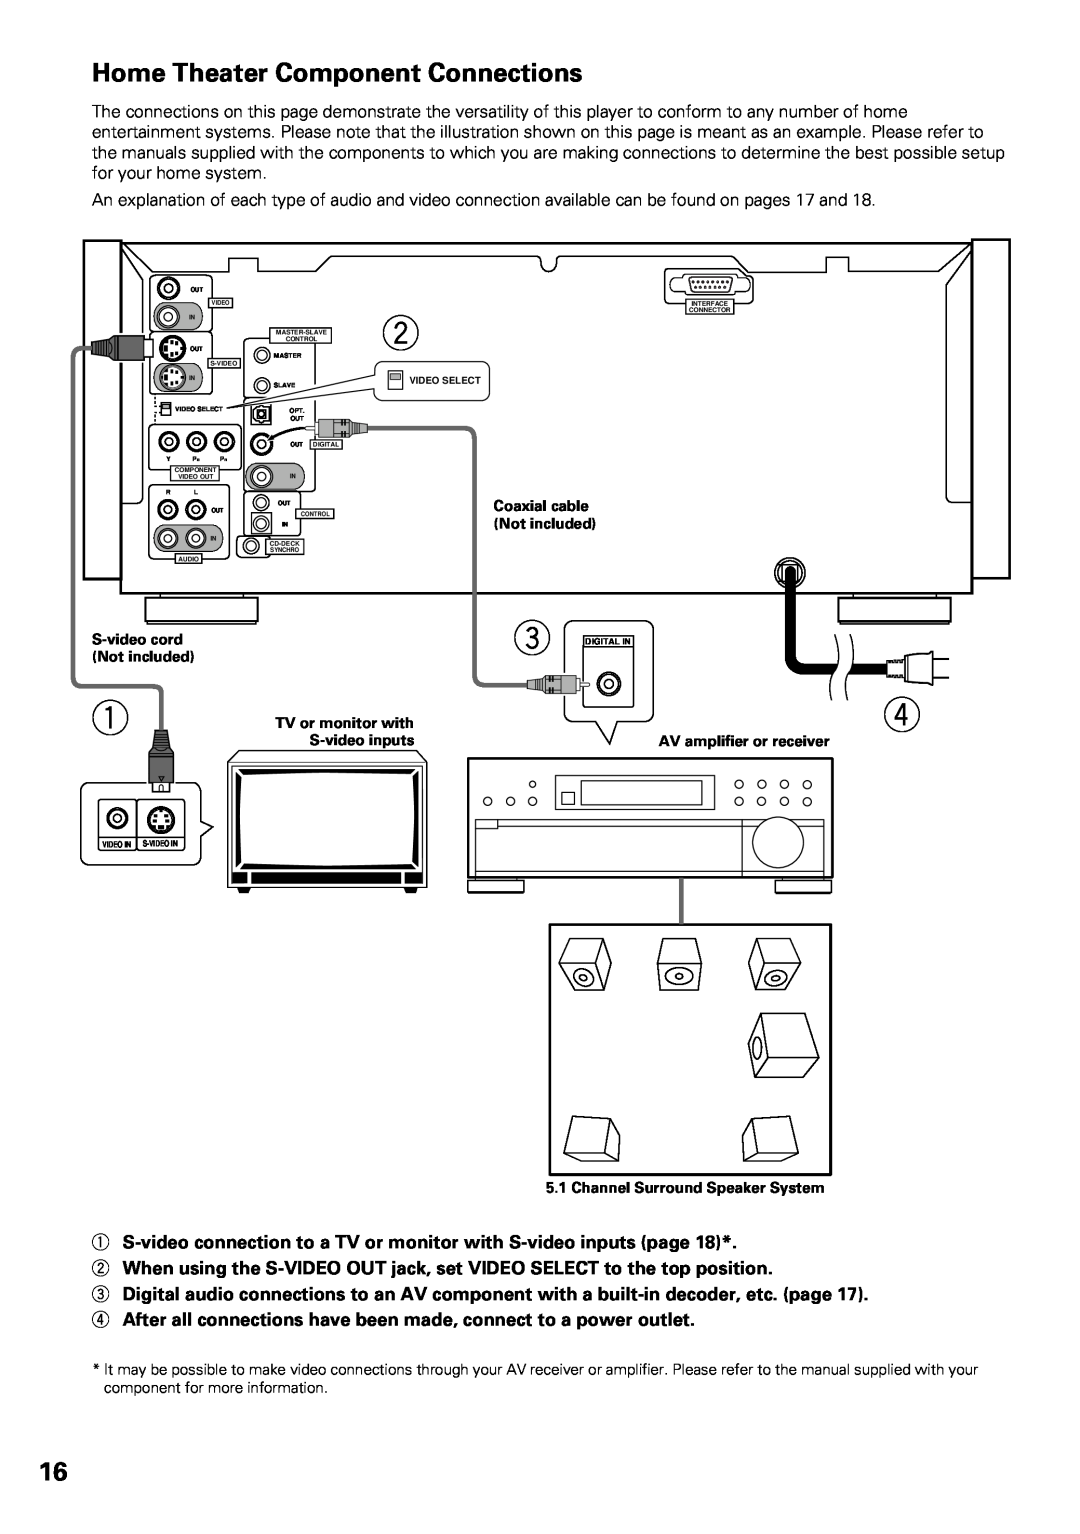 Pioneer DV-F07 Home Theater Component Connections, S-video connection to a TV or monitor with S-video inputs page 